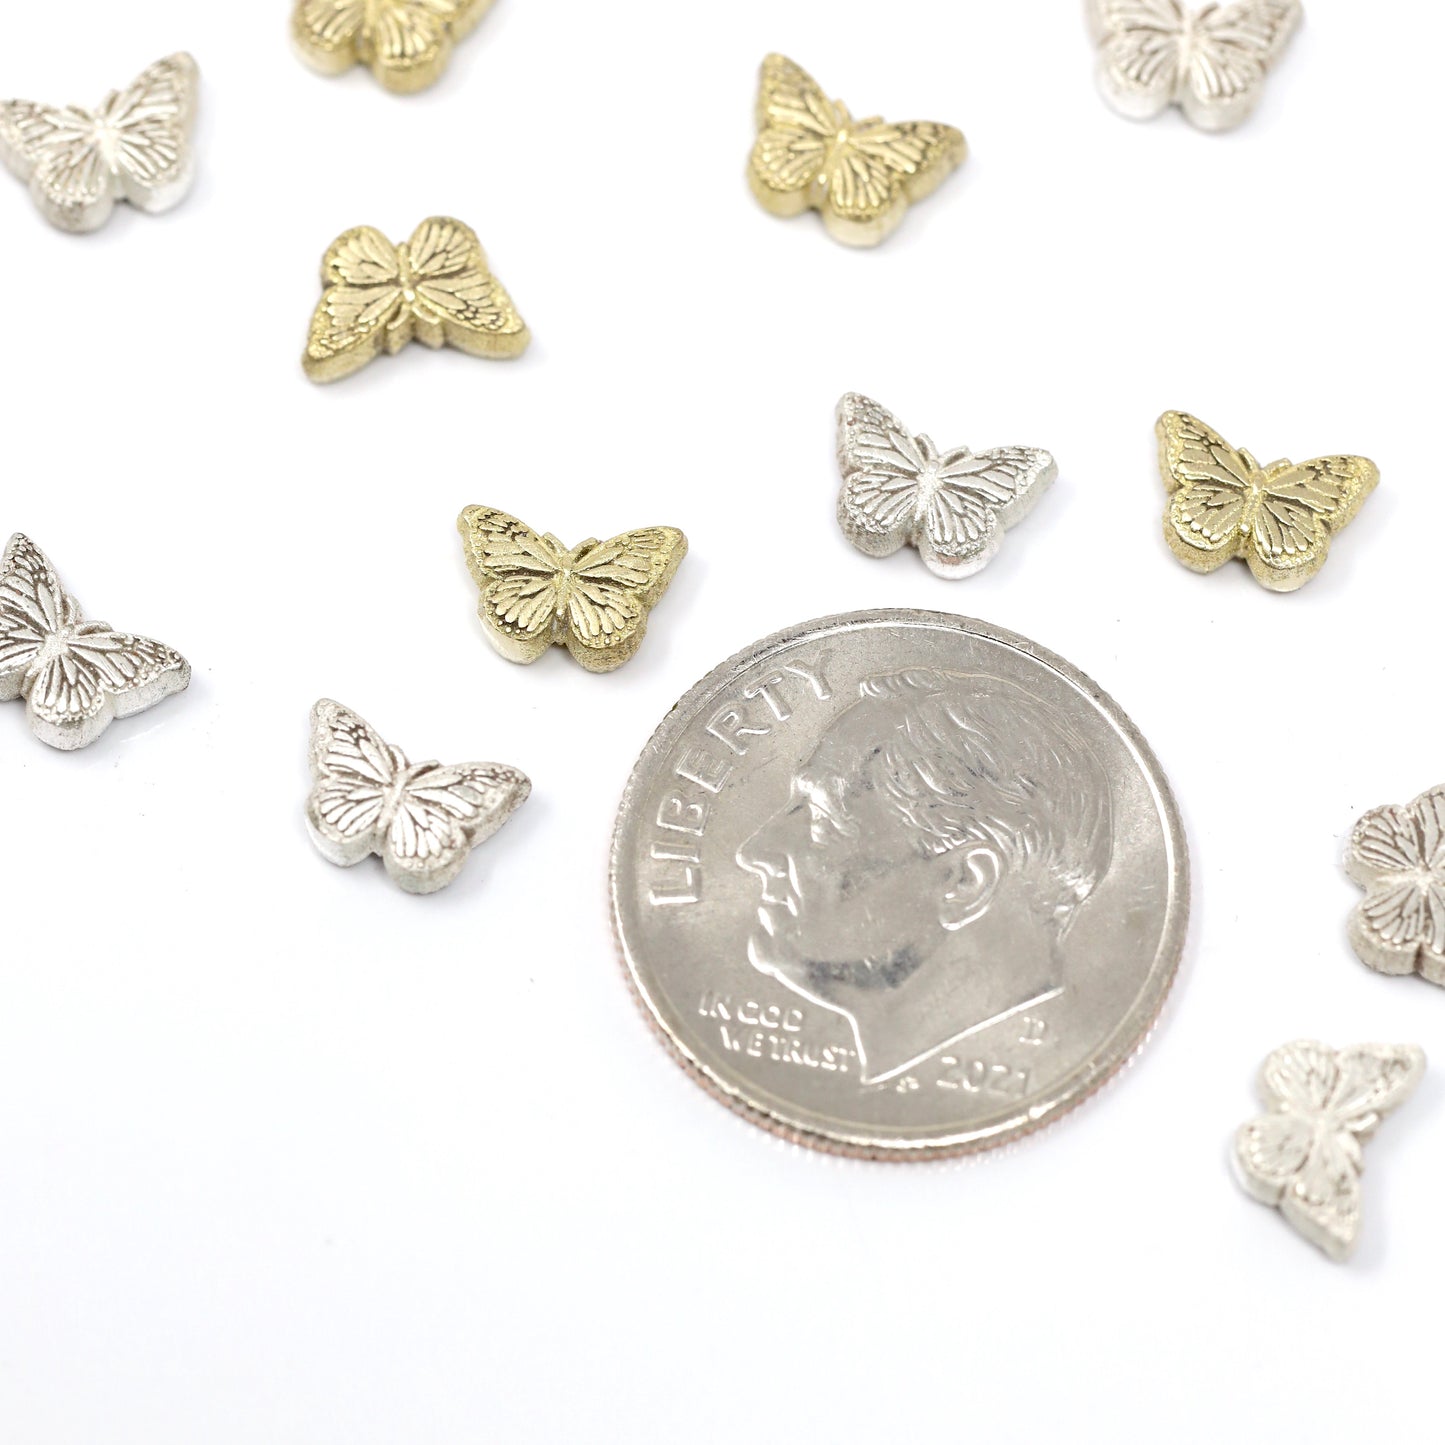 SALE Butterfly Accent Charm Embellishments for Soldering or Jewelry Making